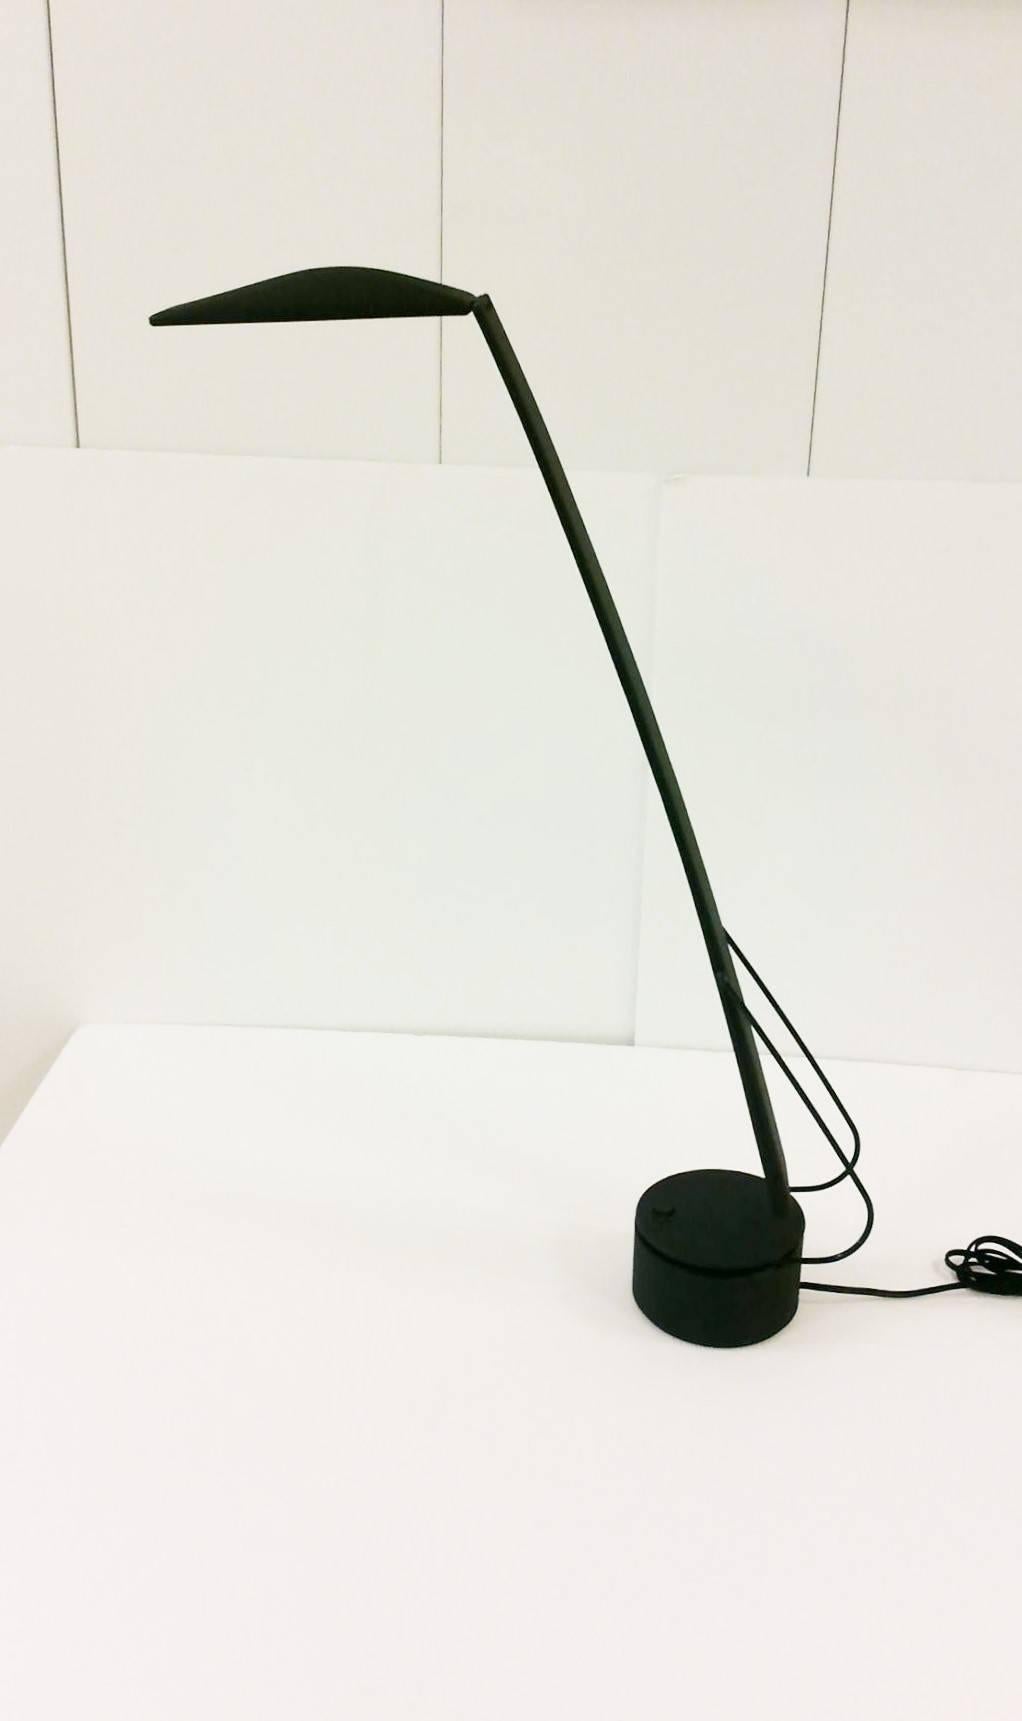 A Post-Modern black reading, desk, or task lamp, DOVE, by Italian designers Mario Barbaglia and Marco Colombo for PAF Studio. Flexible lamp and shade and a base that effortlessly turns 360 degrees. On/off switch on top of base. Maker's mark